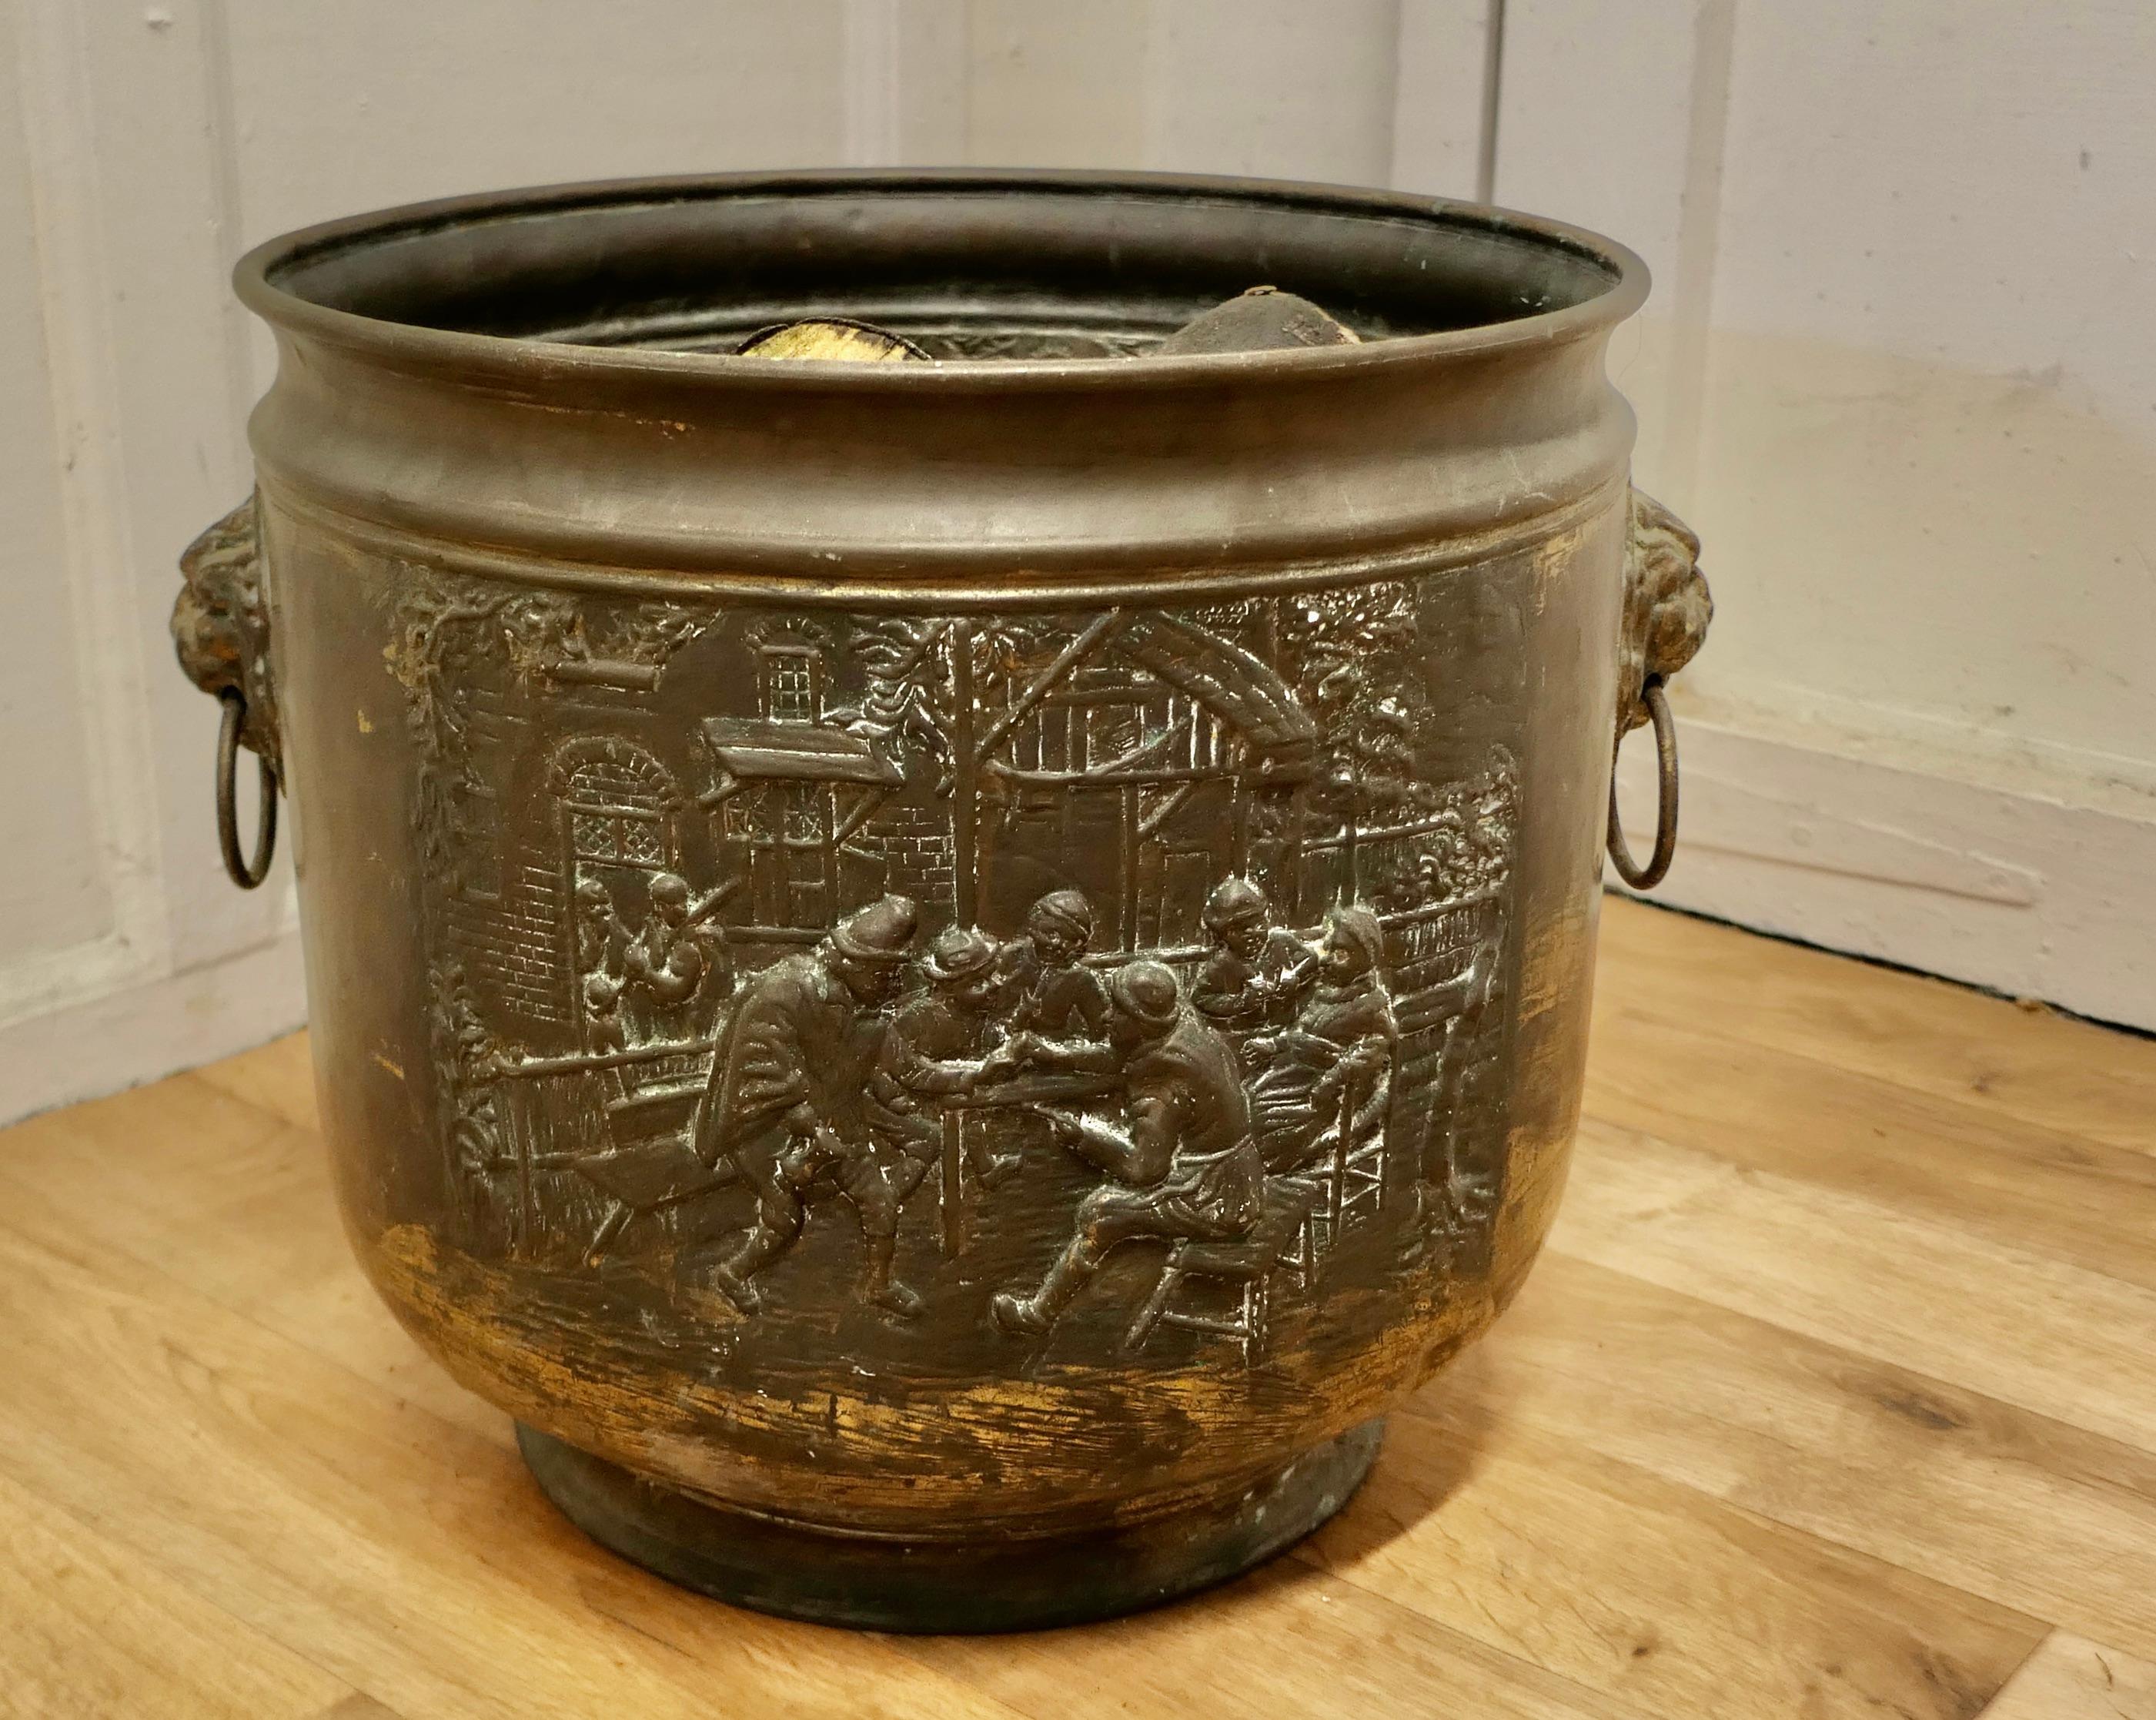 Arts and crafts brass log or coal bin, with tavern scenes 

This is a lovely old cauldron it sits on a brass plinth with Lions mask ring handles at each side, the bucket is made in beaten brass and has embossed Tavern and Country scenes around the